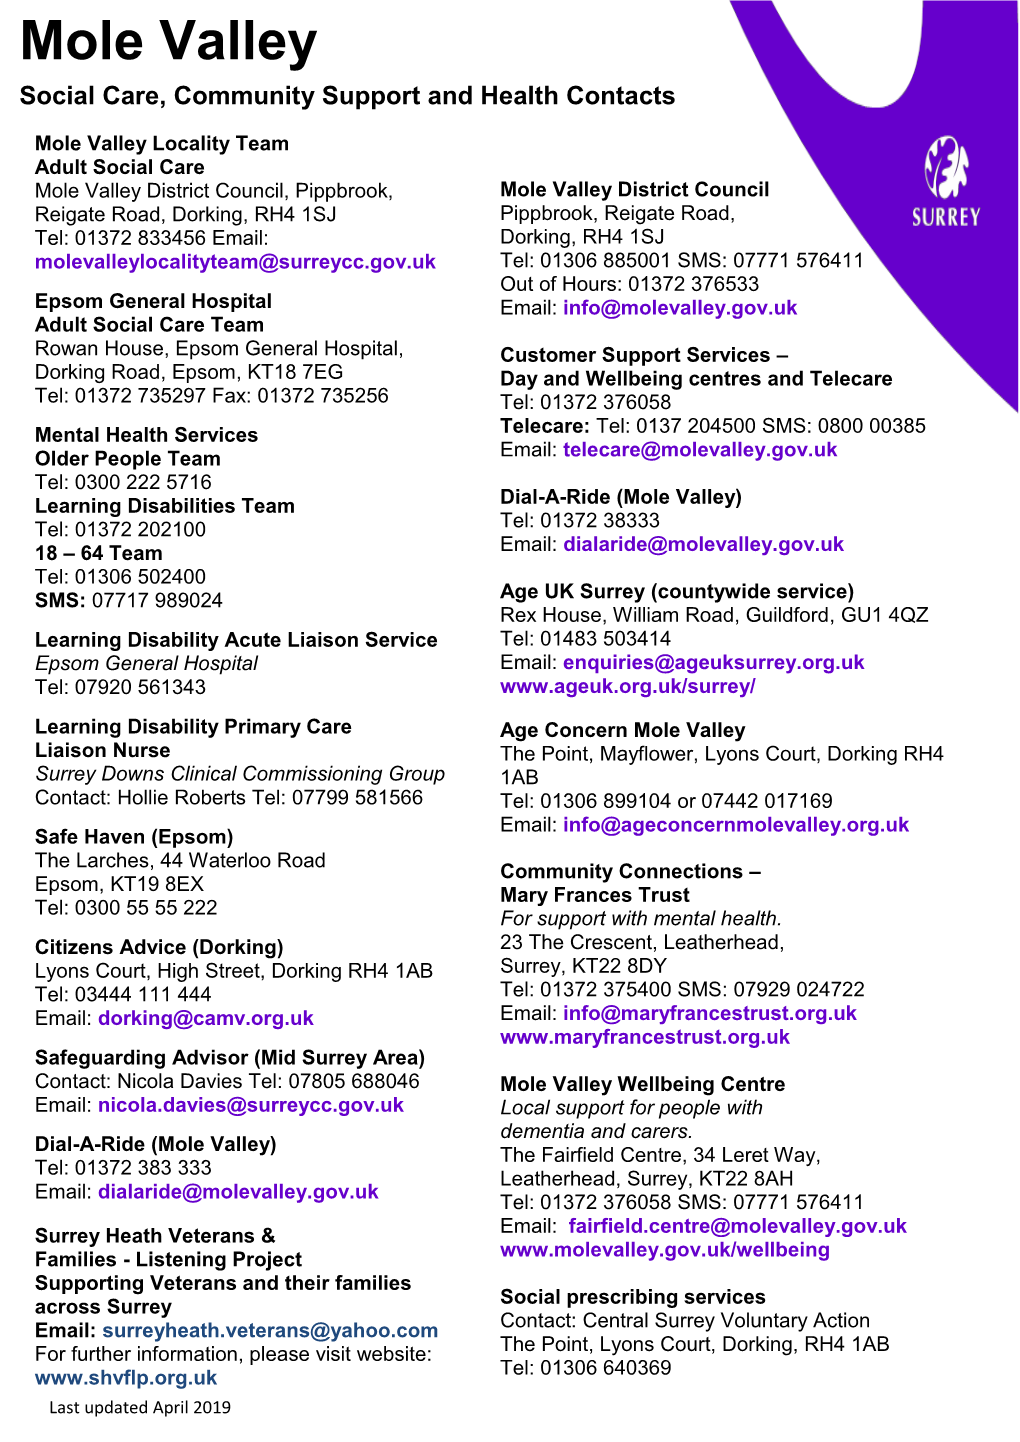 Mole Valley Social Care, Community Support and Health Contacts